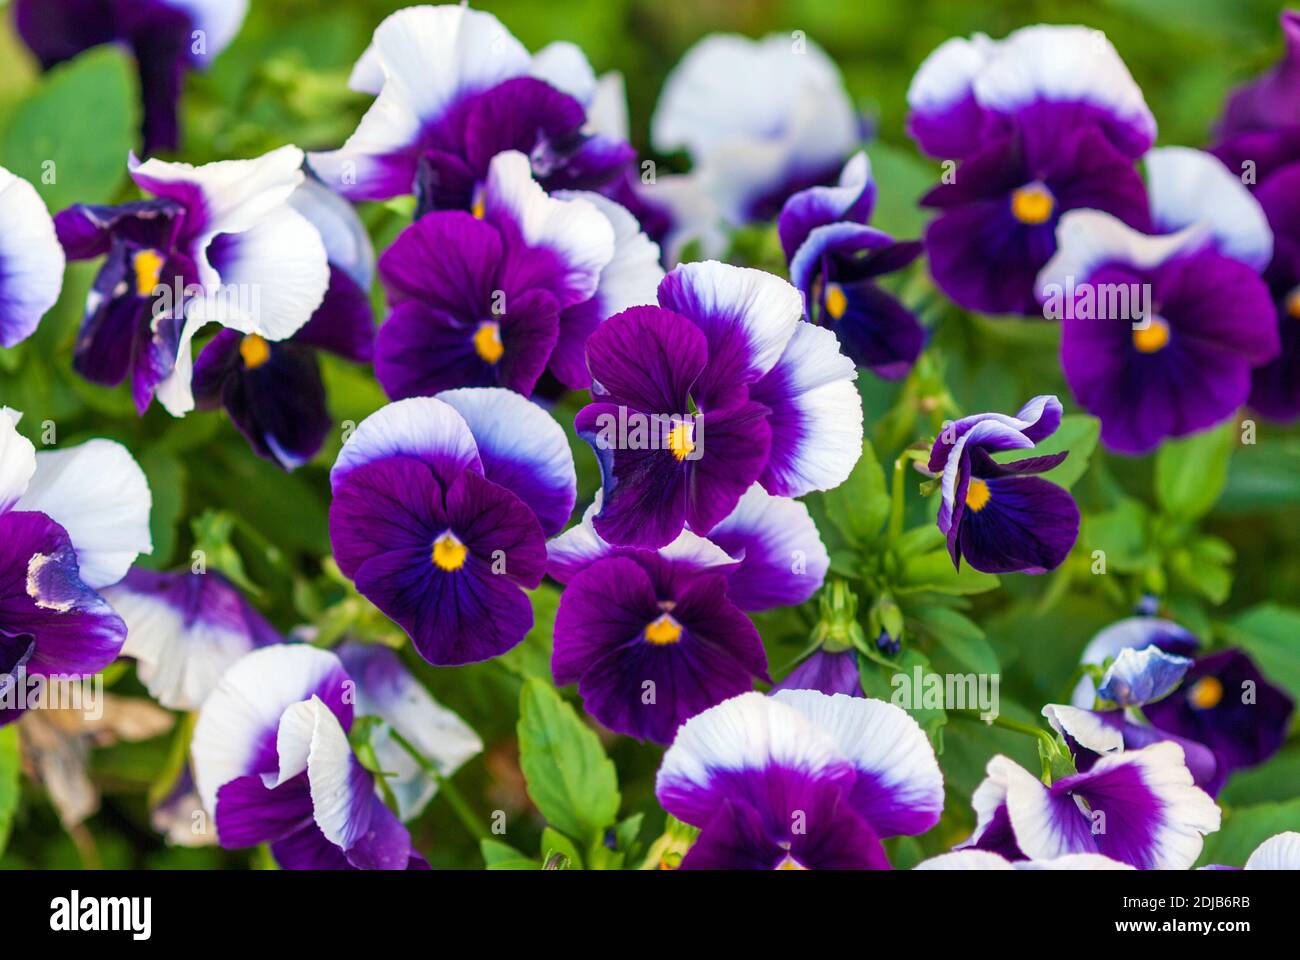 Viola wittrockiana (Inspire Plus Beaconsfield breed) - purple and white large-flowered garden pansies Stock Photo